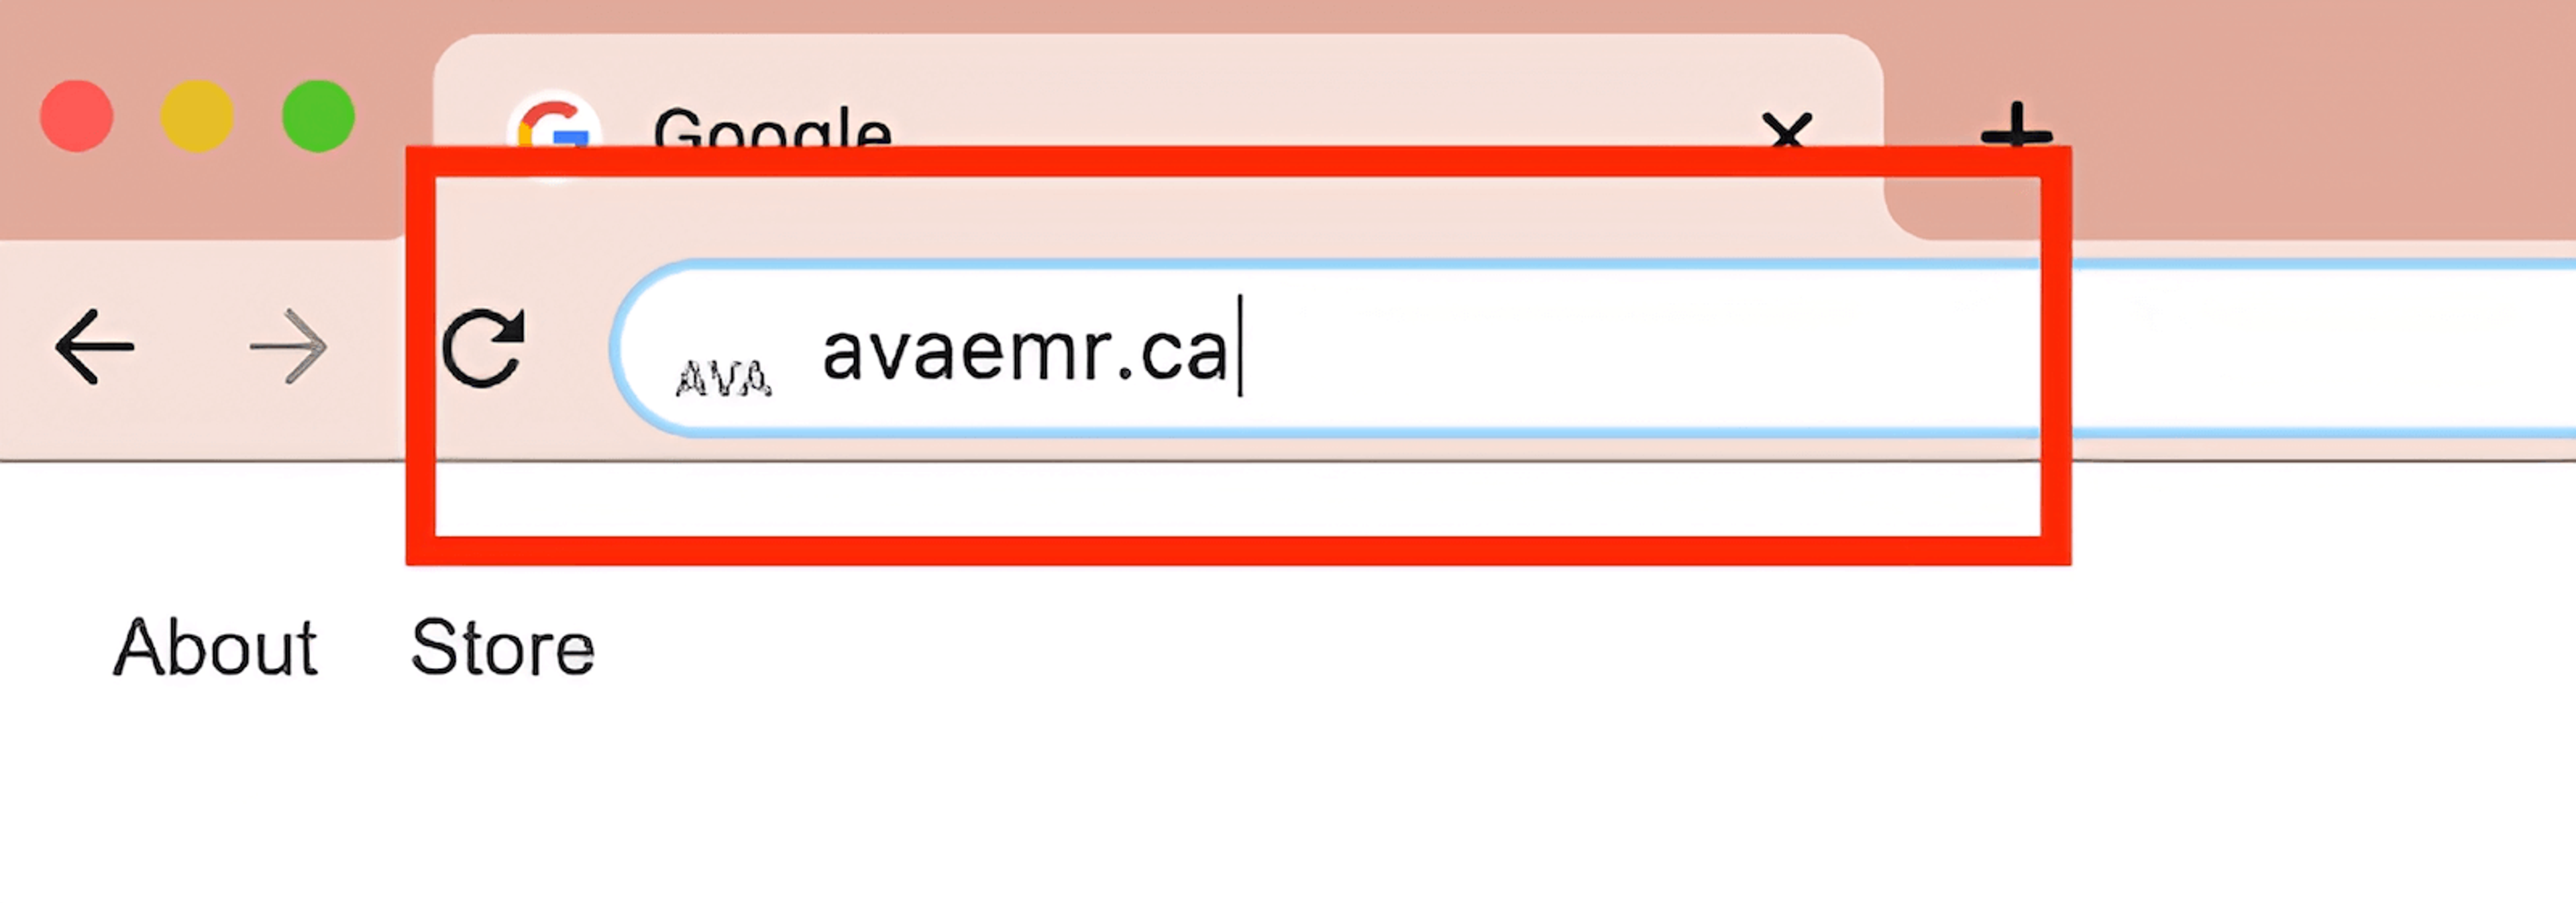 Browser search bar with 'avaemr.ca' typed in.